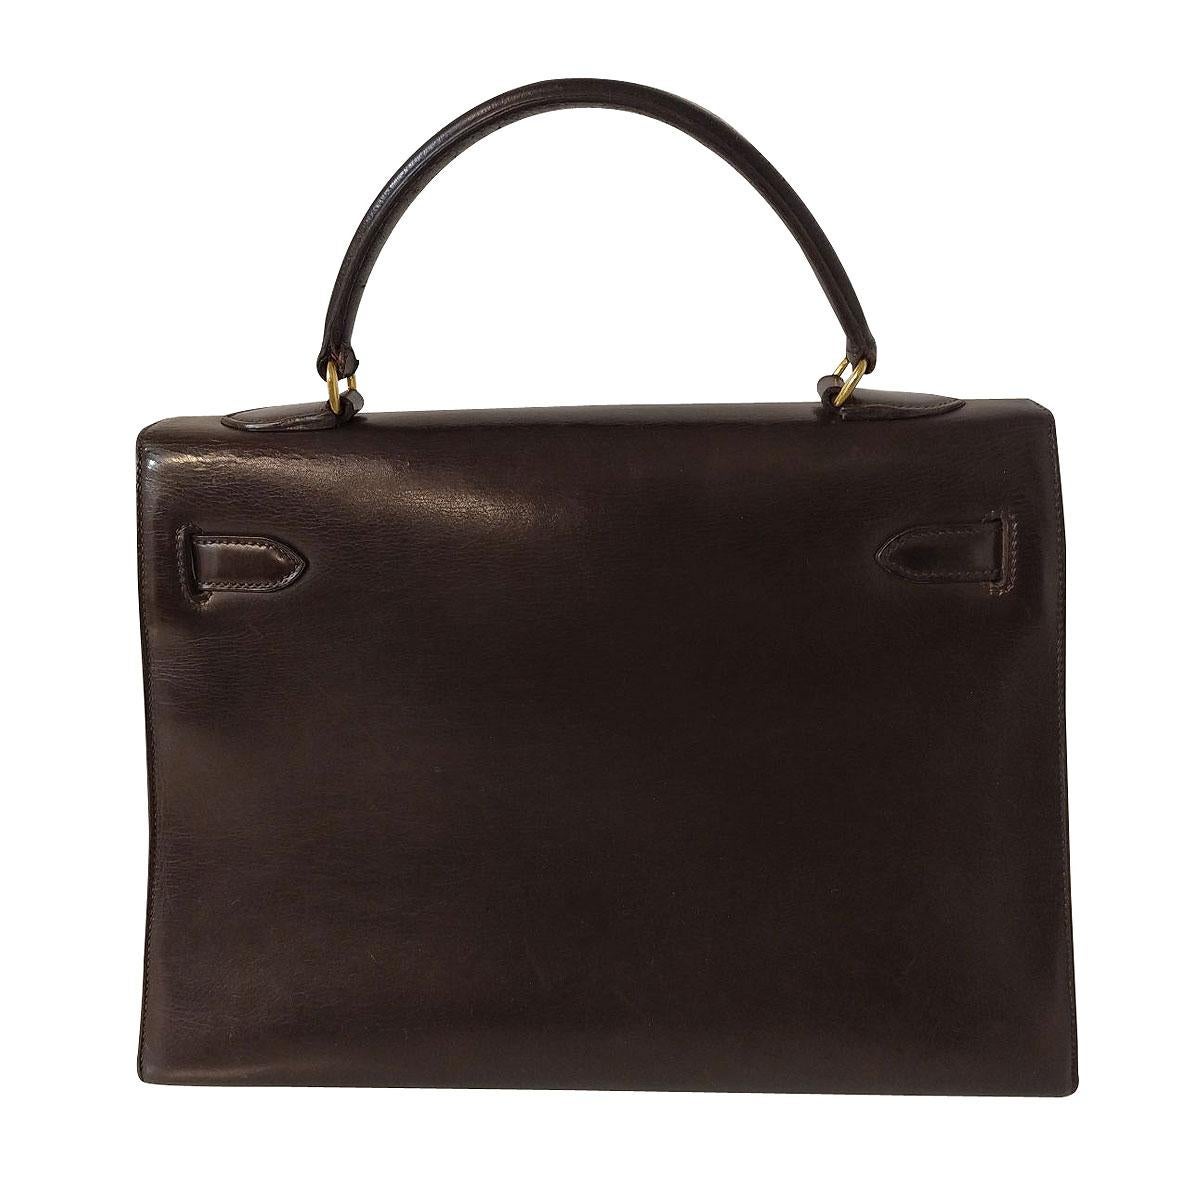 Super iconic and beautiful Hermès bag
Kelly 32
Vintage from '60
Leather
Dark brown color
Single handle
Golden hardware
Comes with original locker and keys
Very good conditions (very light signs due to time, as in pictures)
Little unstitching on the